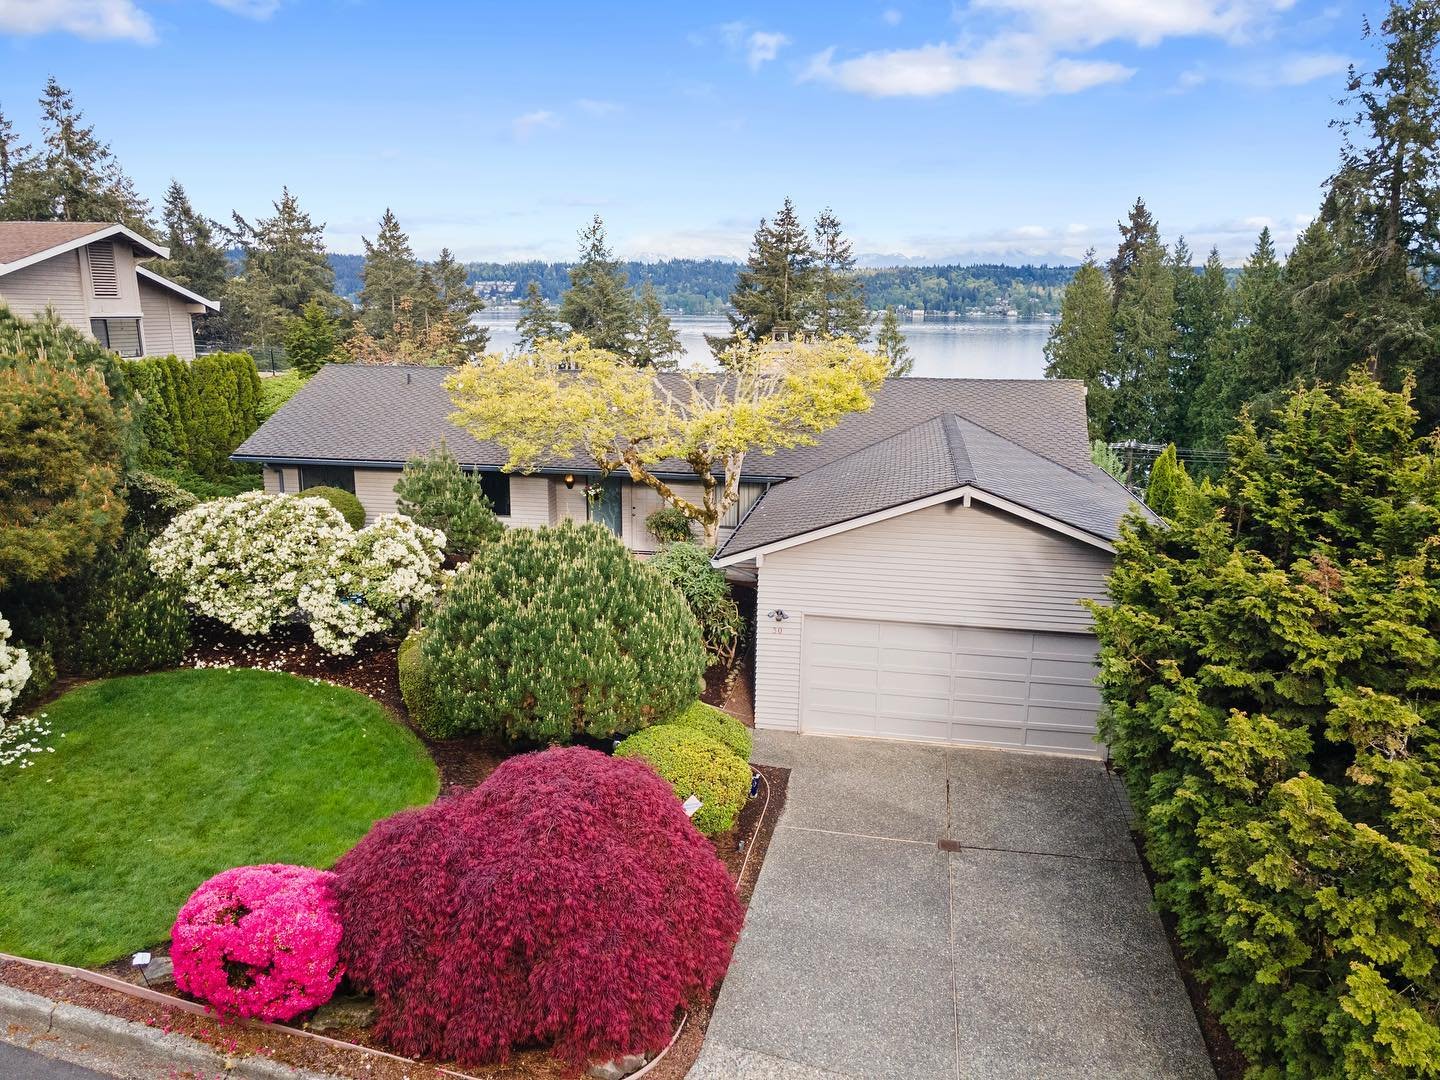 With views of the lake almost out of every room, the stunner in Bellevue is one you don&rsquo;t want to miss!😍💧

Listed by: Sarah Humes
Brokered by: @c21northhomes 

Send us a message, leave a comment, or visit the link in our bio to schedule your 